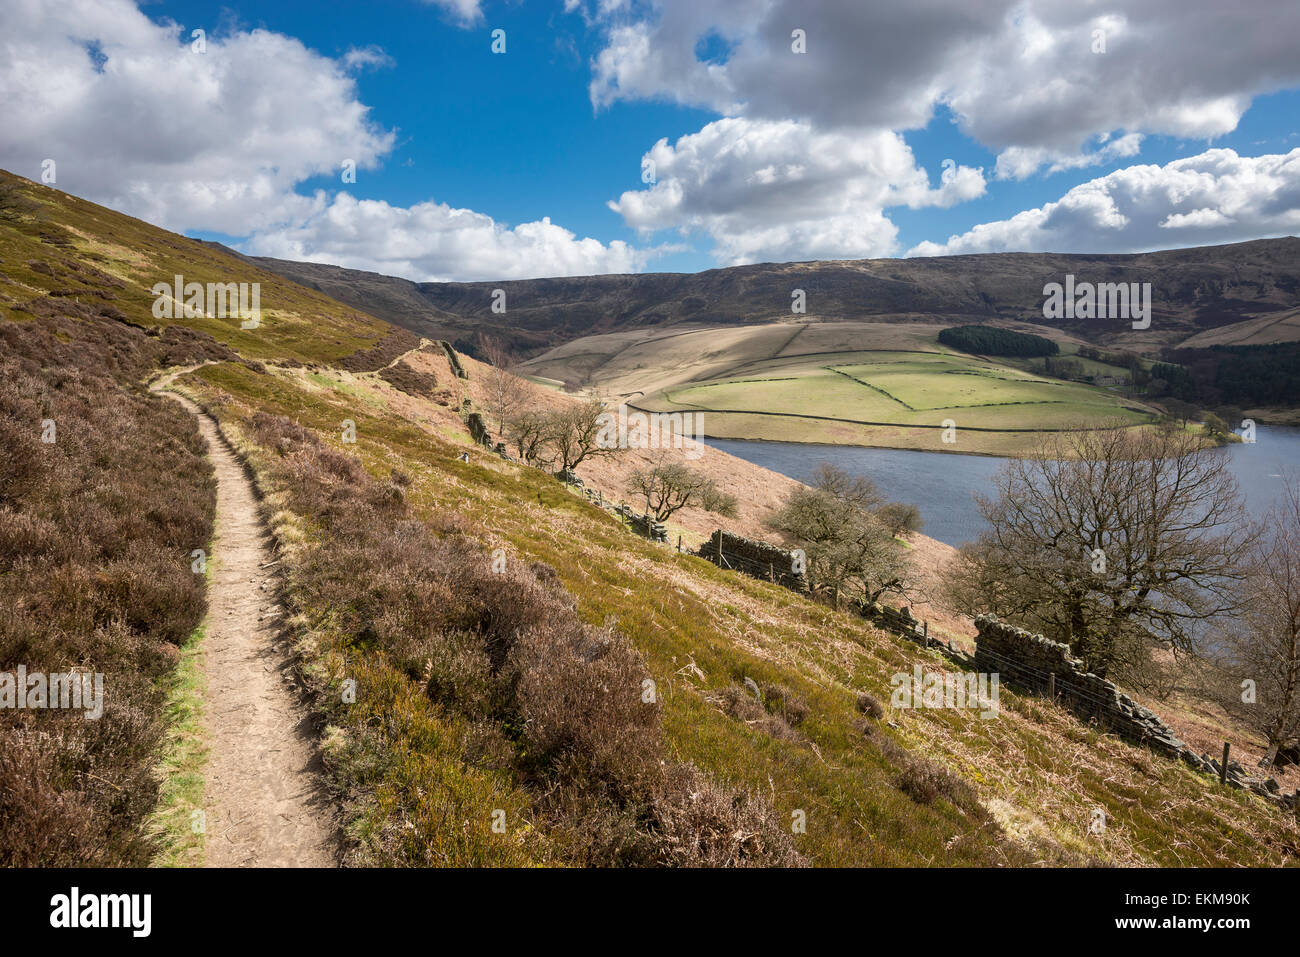 Footpath above Kinder reservoir in the Peak District with views to Kinder Scout. Stock Photo